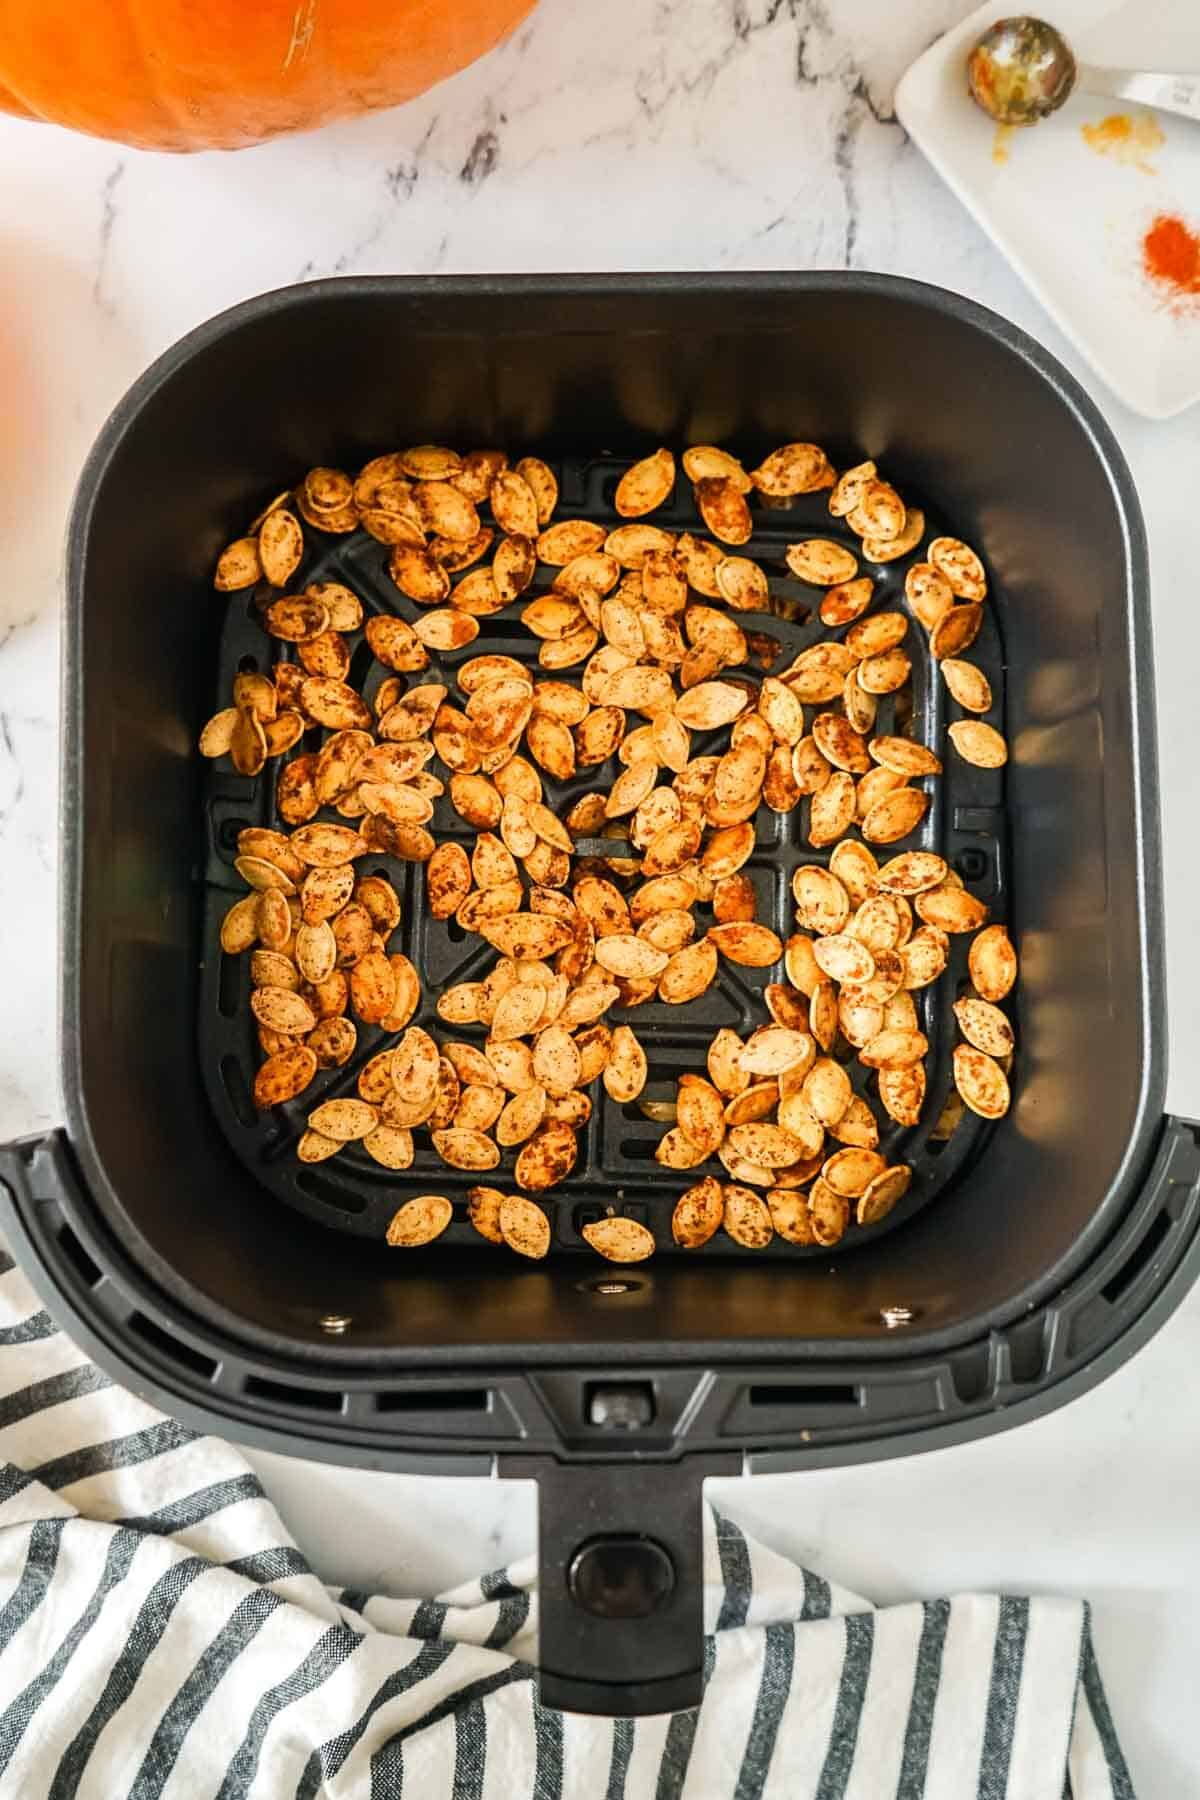 Pumpkin seeds in the air fryer basket after being cooked.